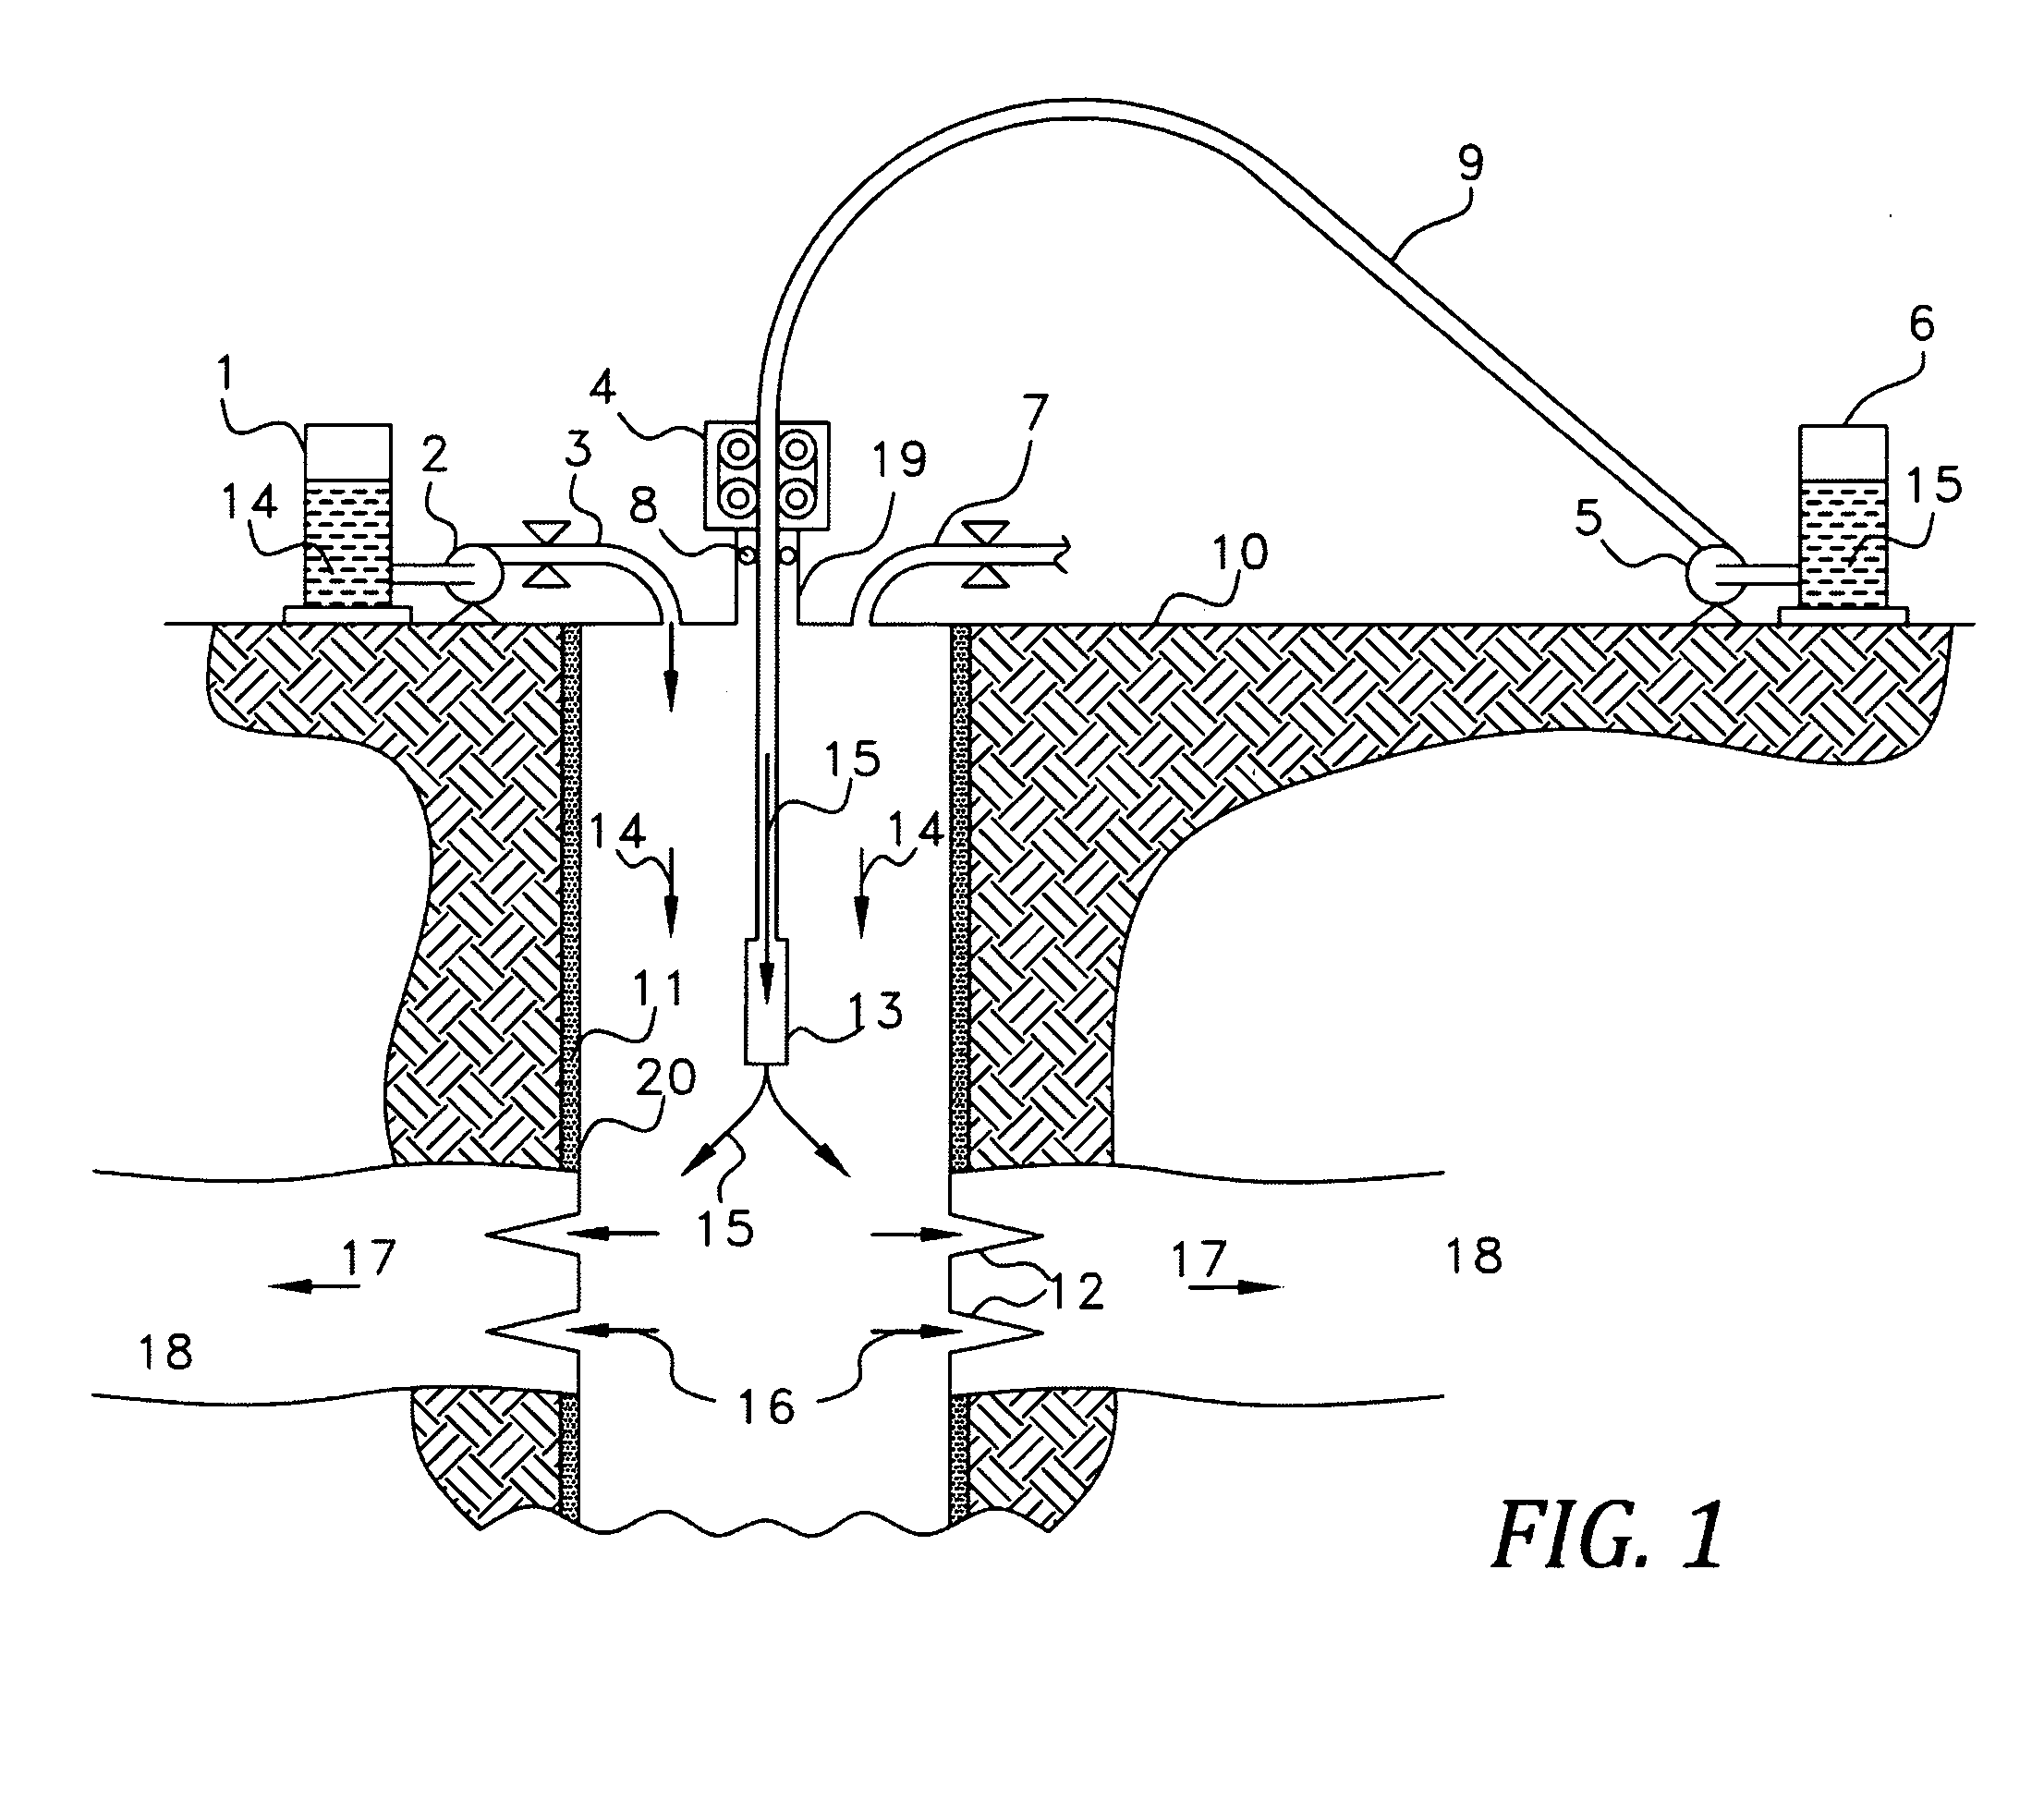 Method, apparatus and composition to increase recovery of hydrocarbons by reaction of selective oxidizers and fuels in the subterranean environment